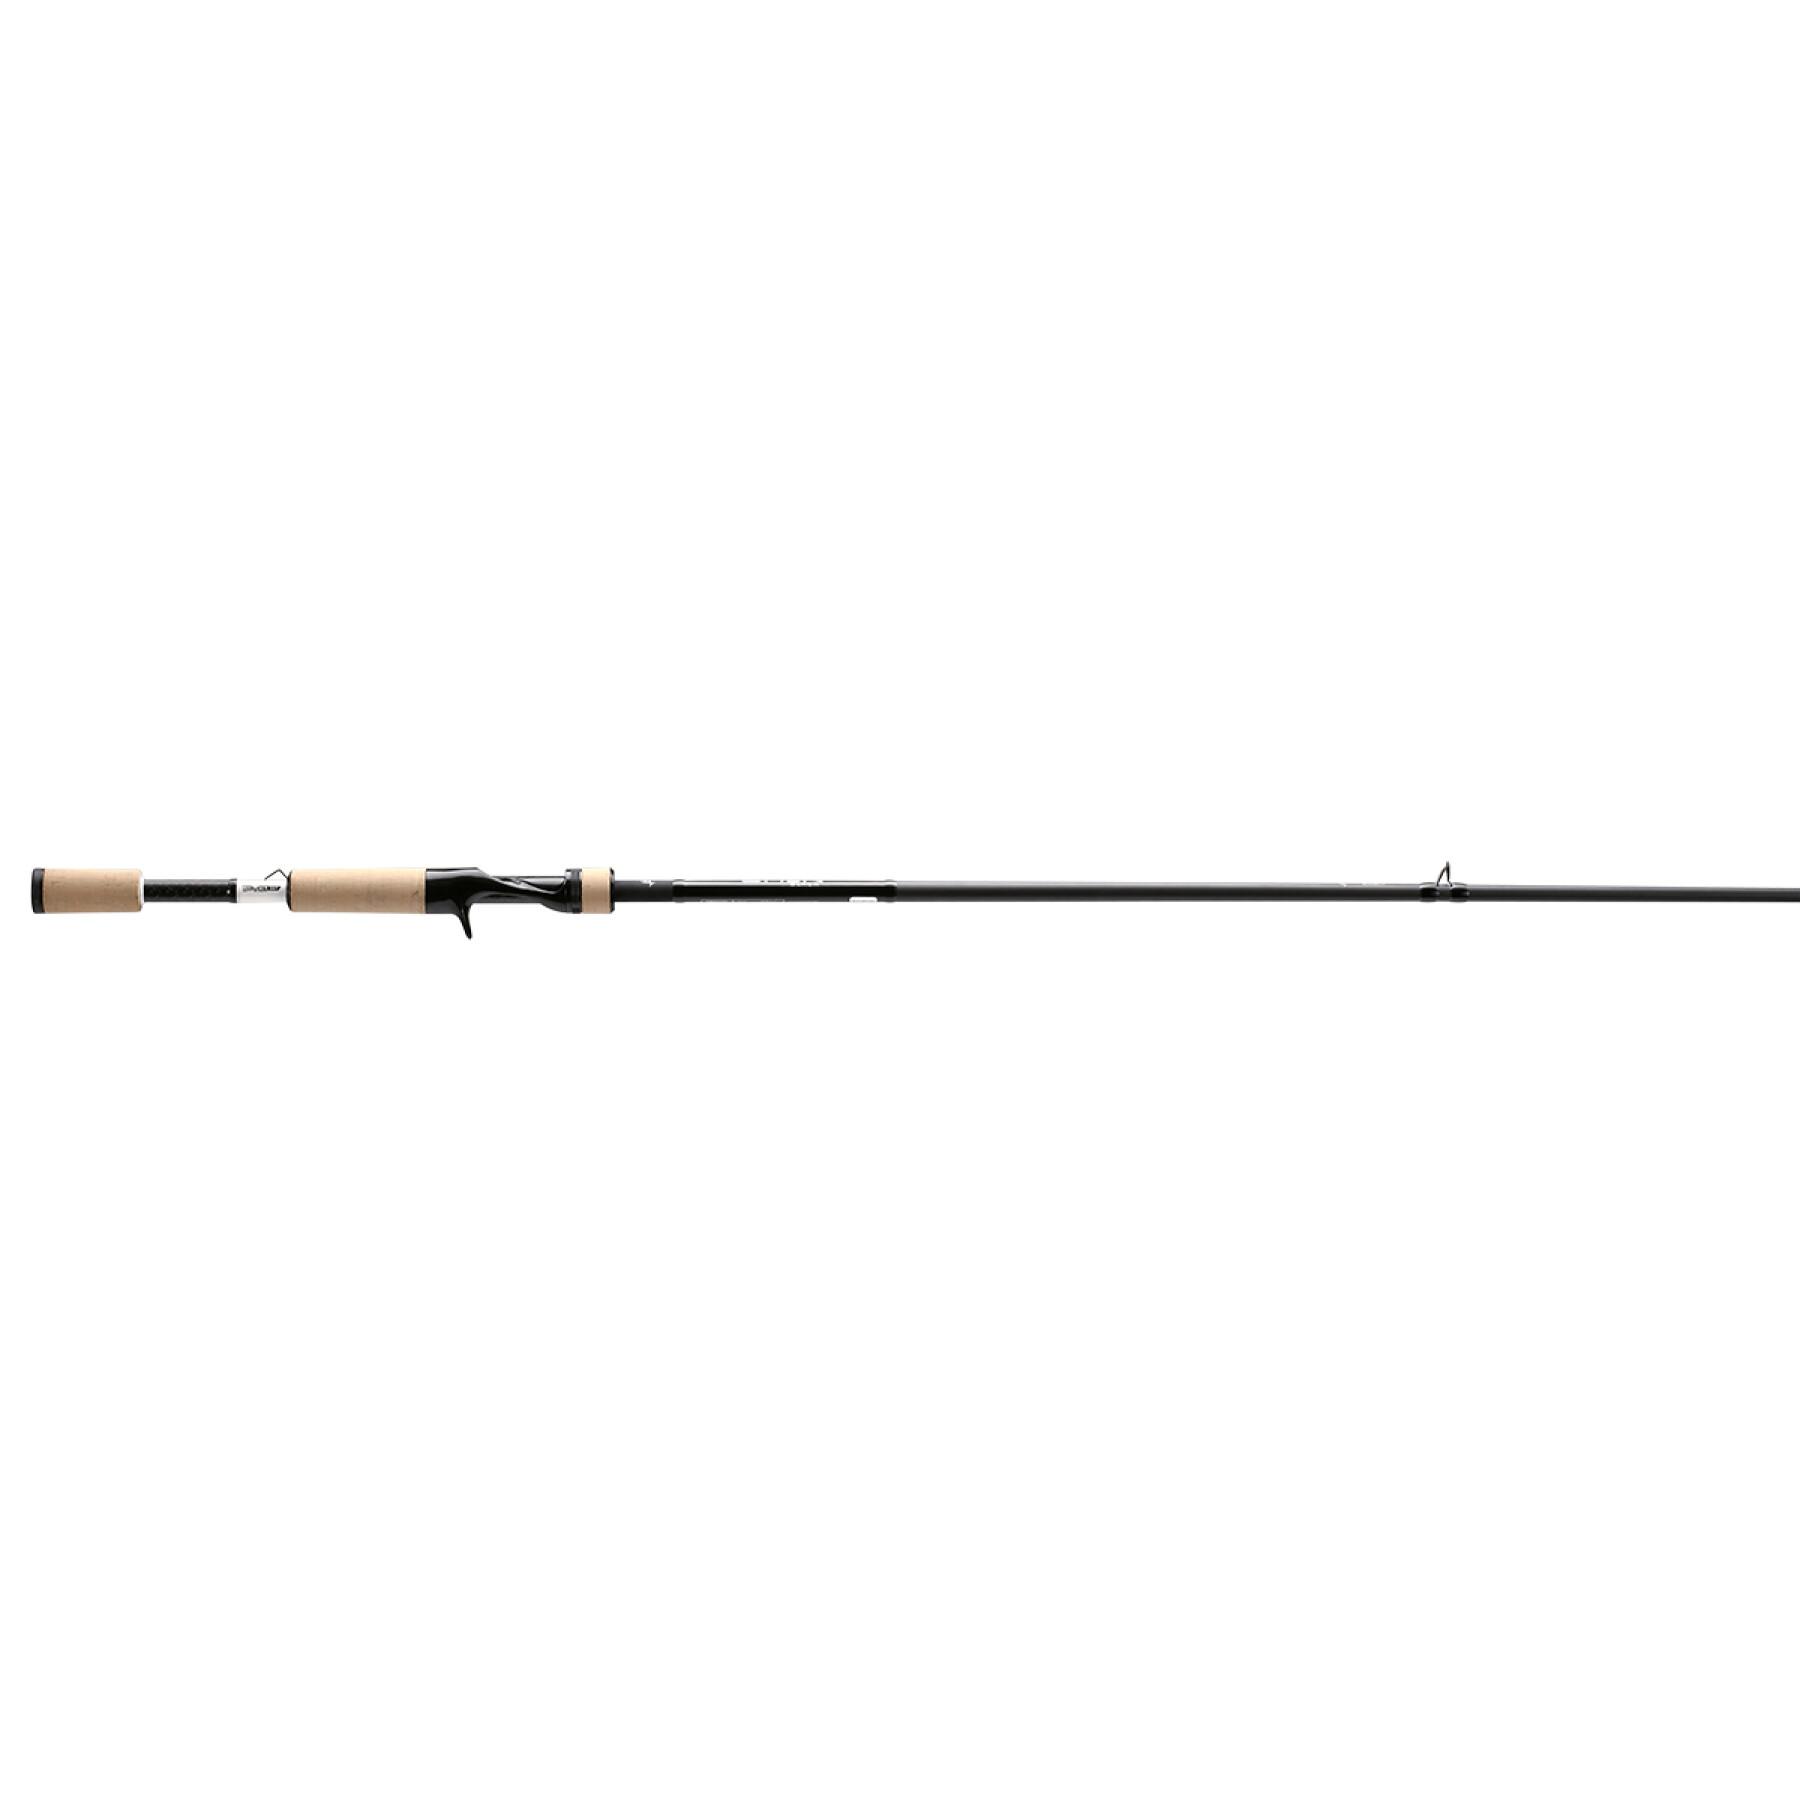 Angelrute 13 Fishing Cast 2,59m 10-30g